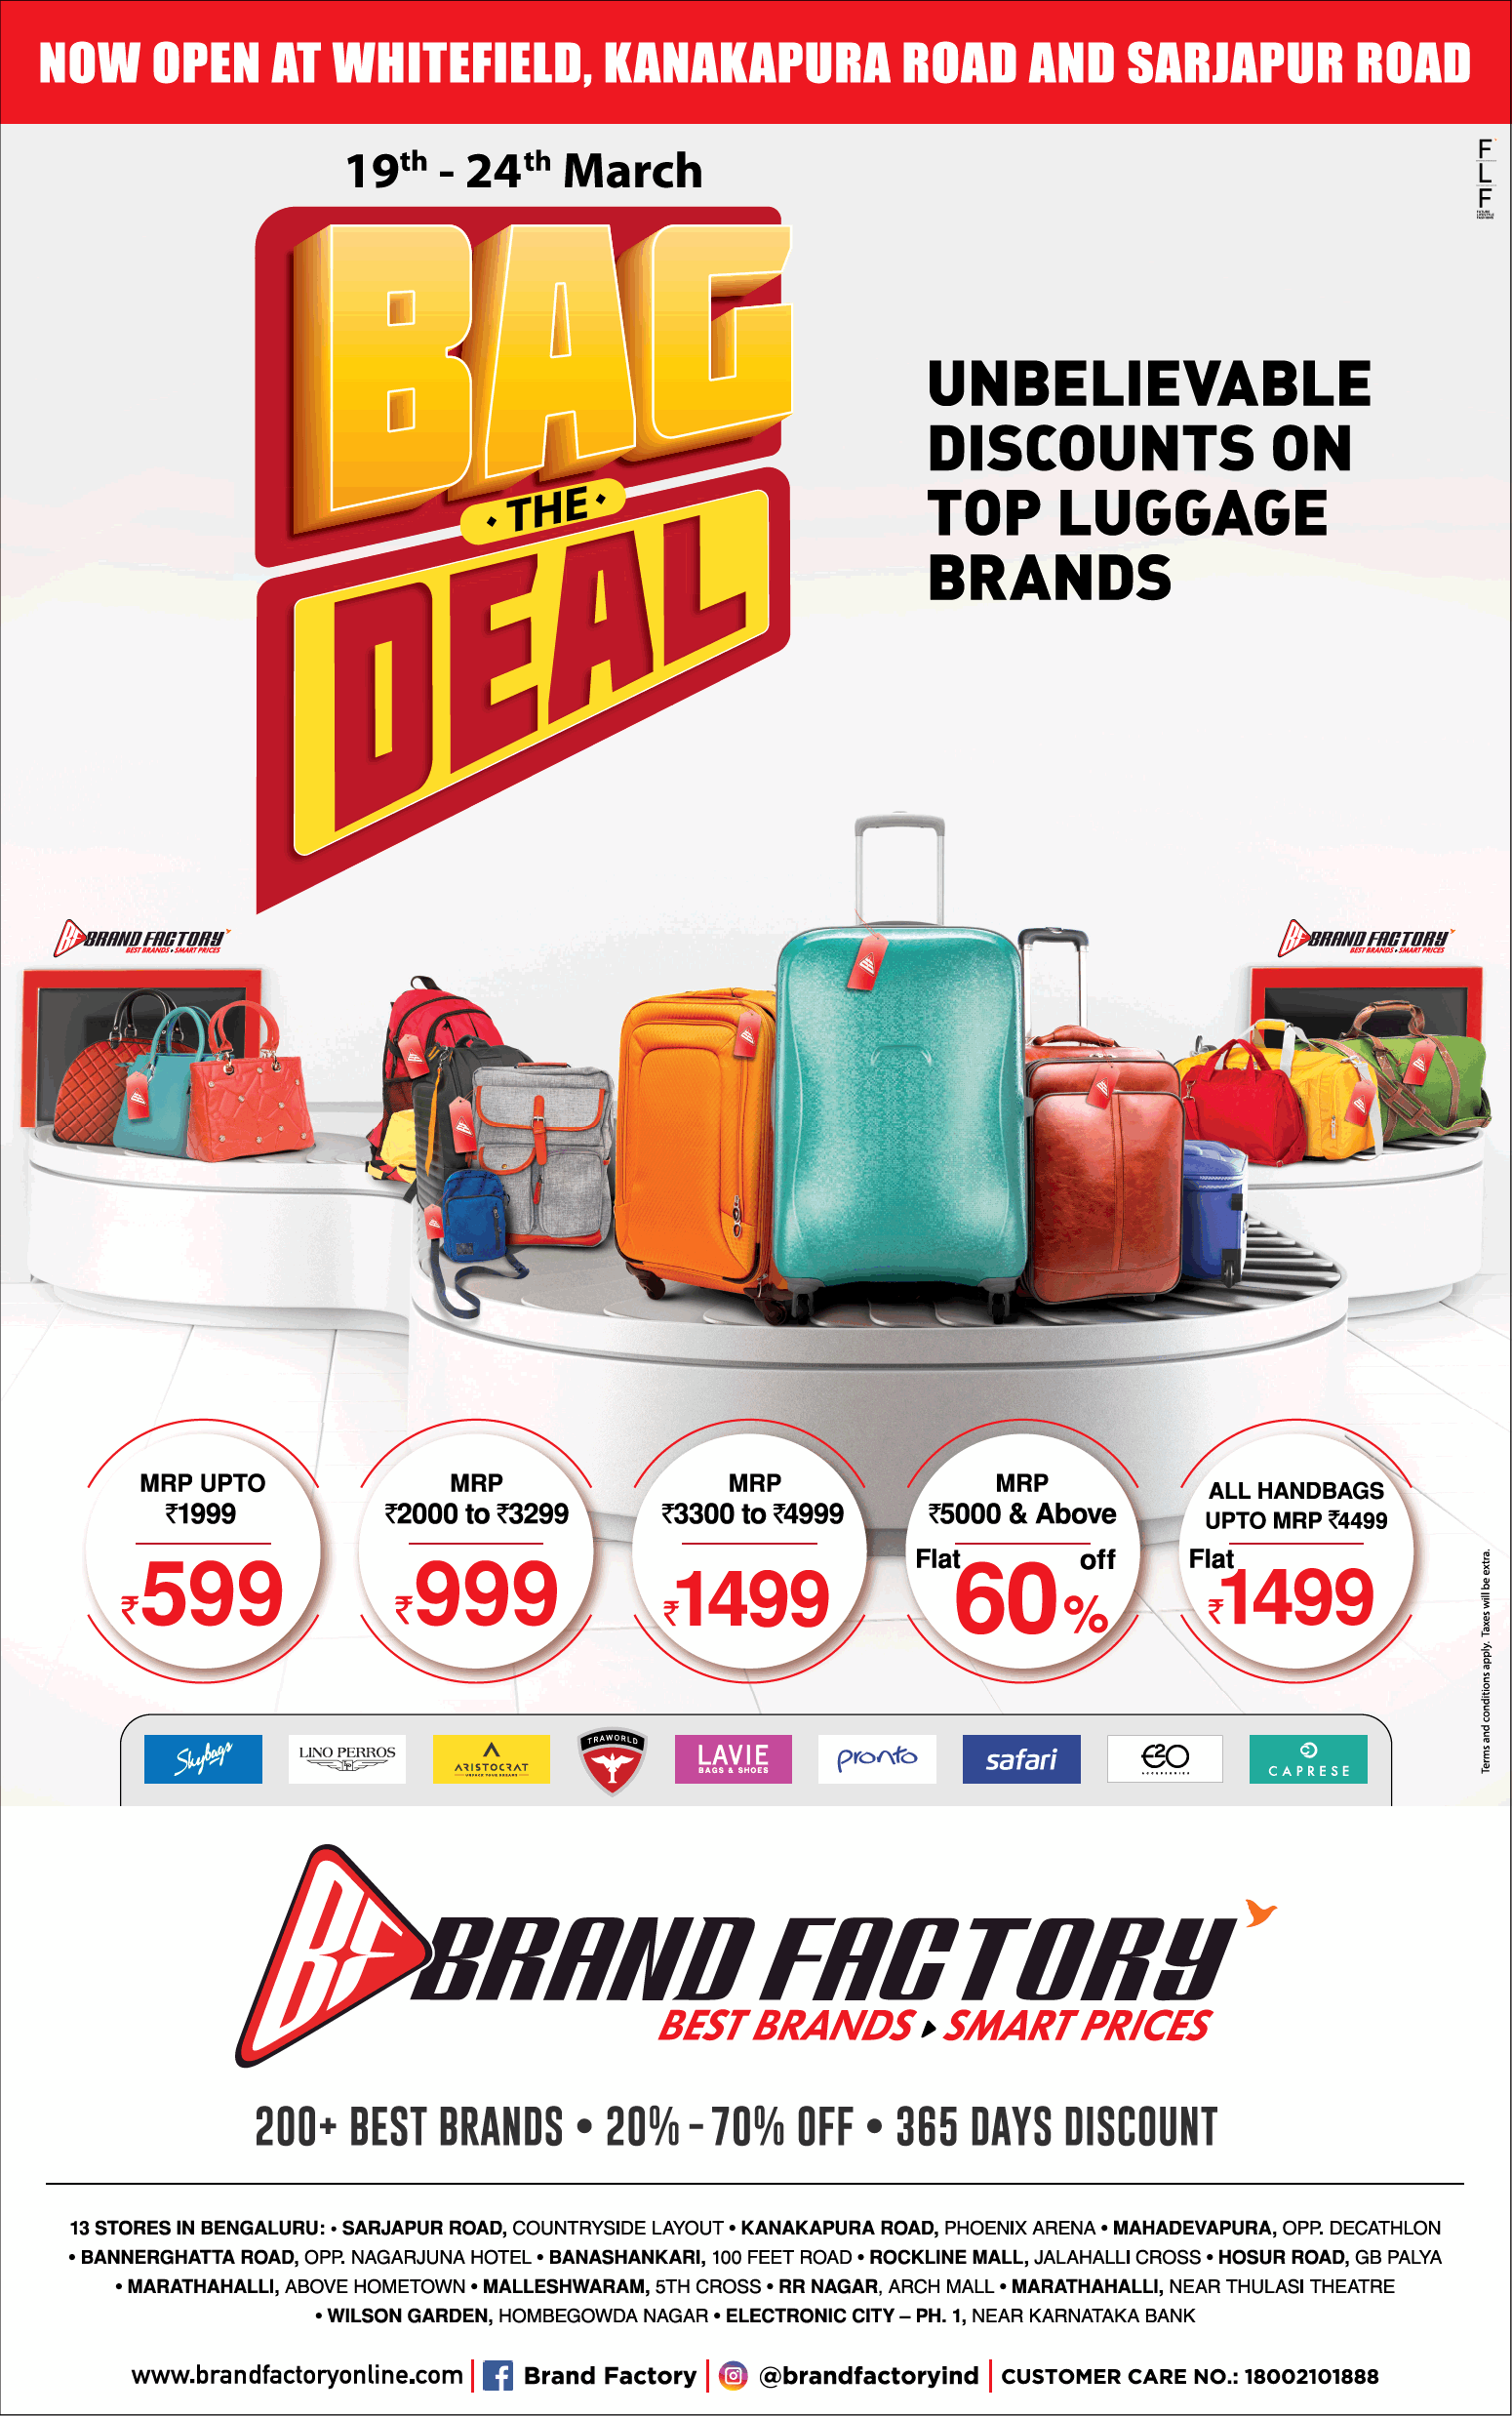 brand-factory-bag-the-deal-unbelievable-discounts-ad-bangalore-times-19-03-2019.png